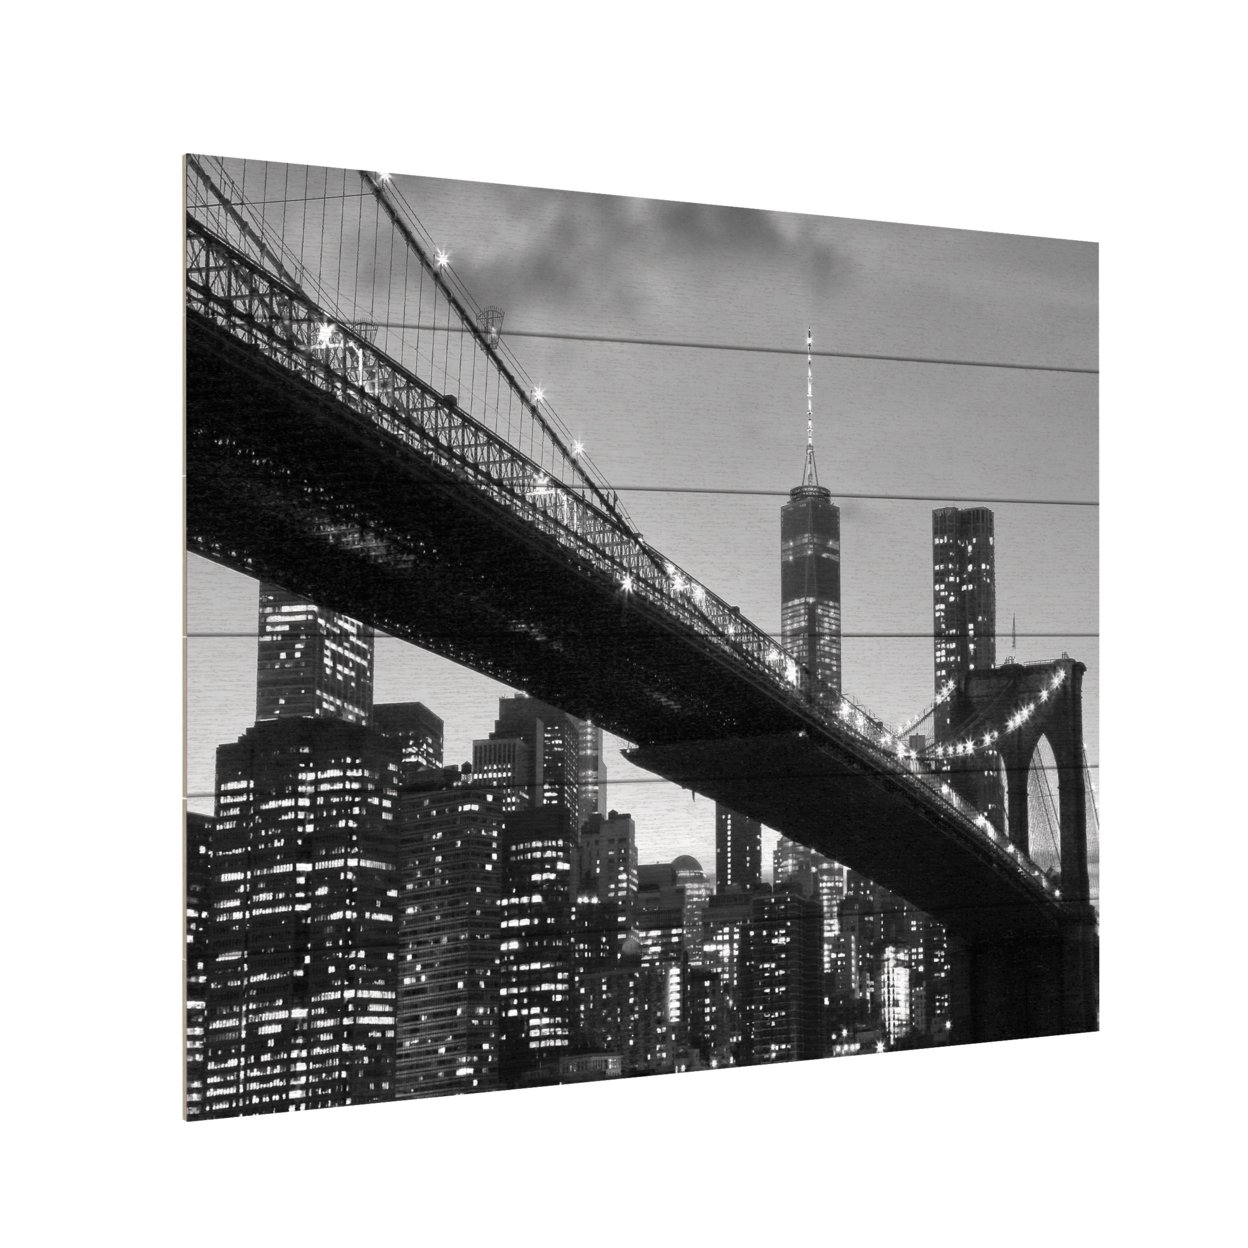 Wooden Slat Art 18 X 22 Inches Titled Brooklyn Bridge 5 Ready To Hang Home Decor Picture